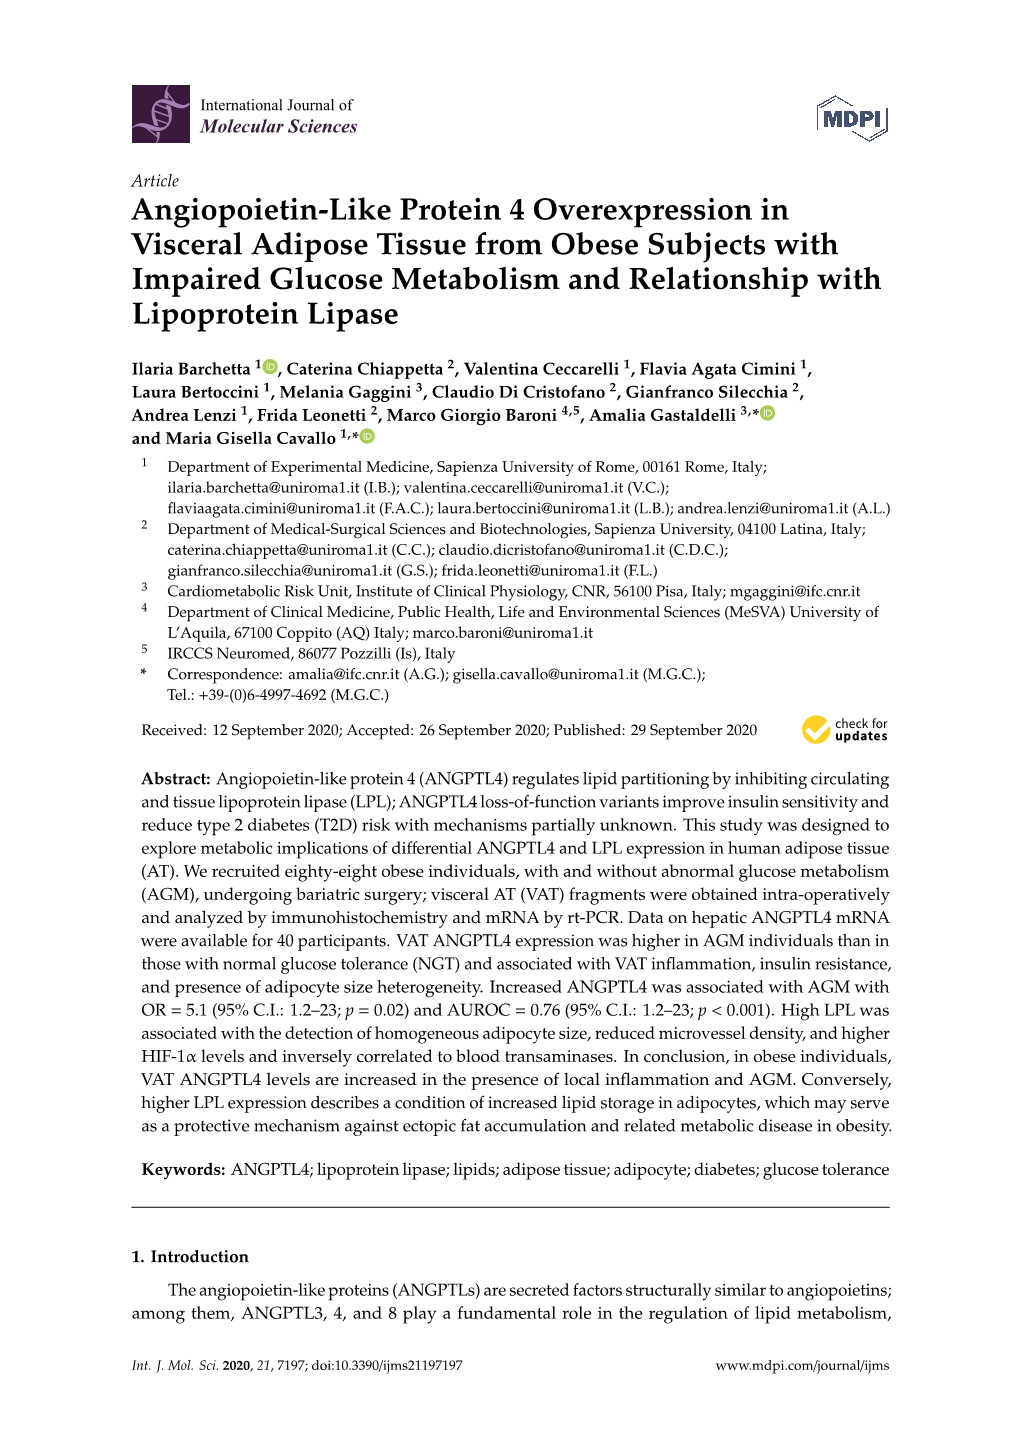 Angiopoietin-Like Protein 4 Overexpression in Visceral Adipose Tissue from Obese Subjects with Impaired Glucose Metabolism and Relationship with Lipoprotein Lipase